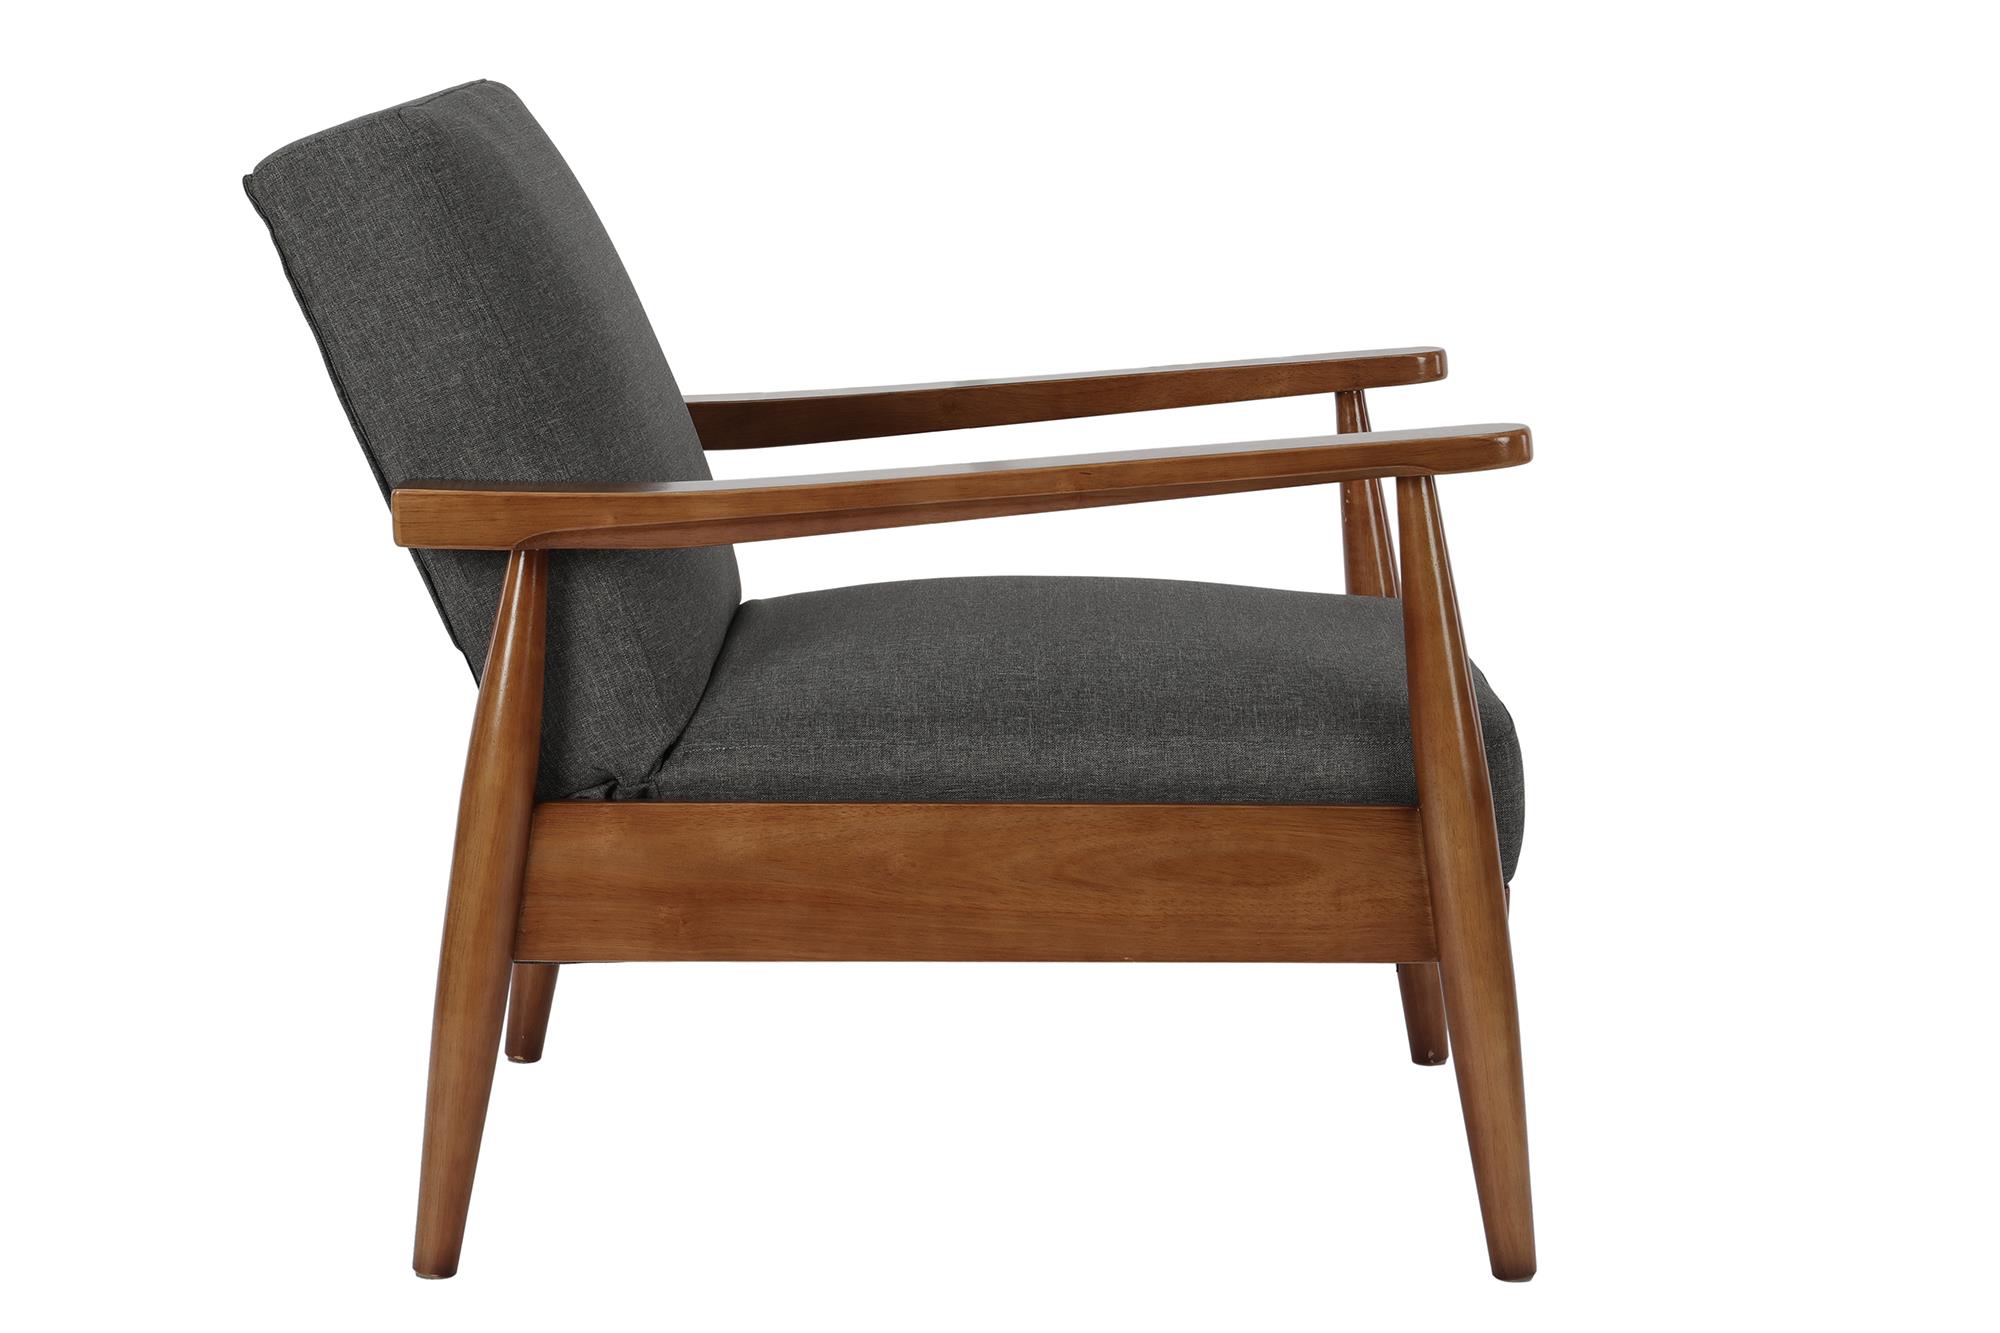 Better Homes & Gardens Mid Century Chair - image 5 of 22